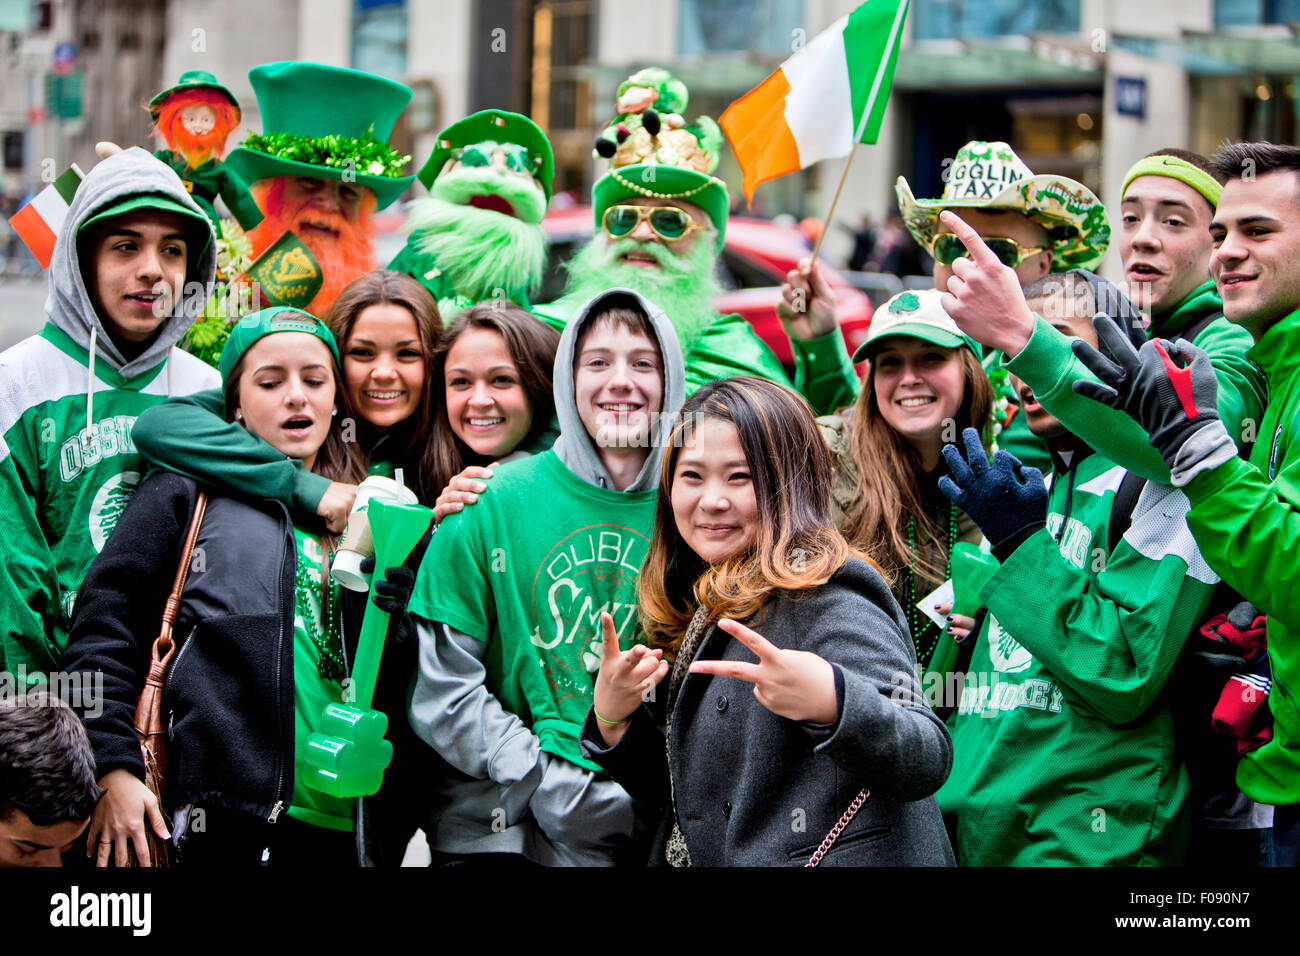 NEW YORK, NY, USA - MAR 17: St. Patrick's Day Parade on March 17, 2013 in  New York City, United States Stock Photo - Alamy